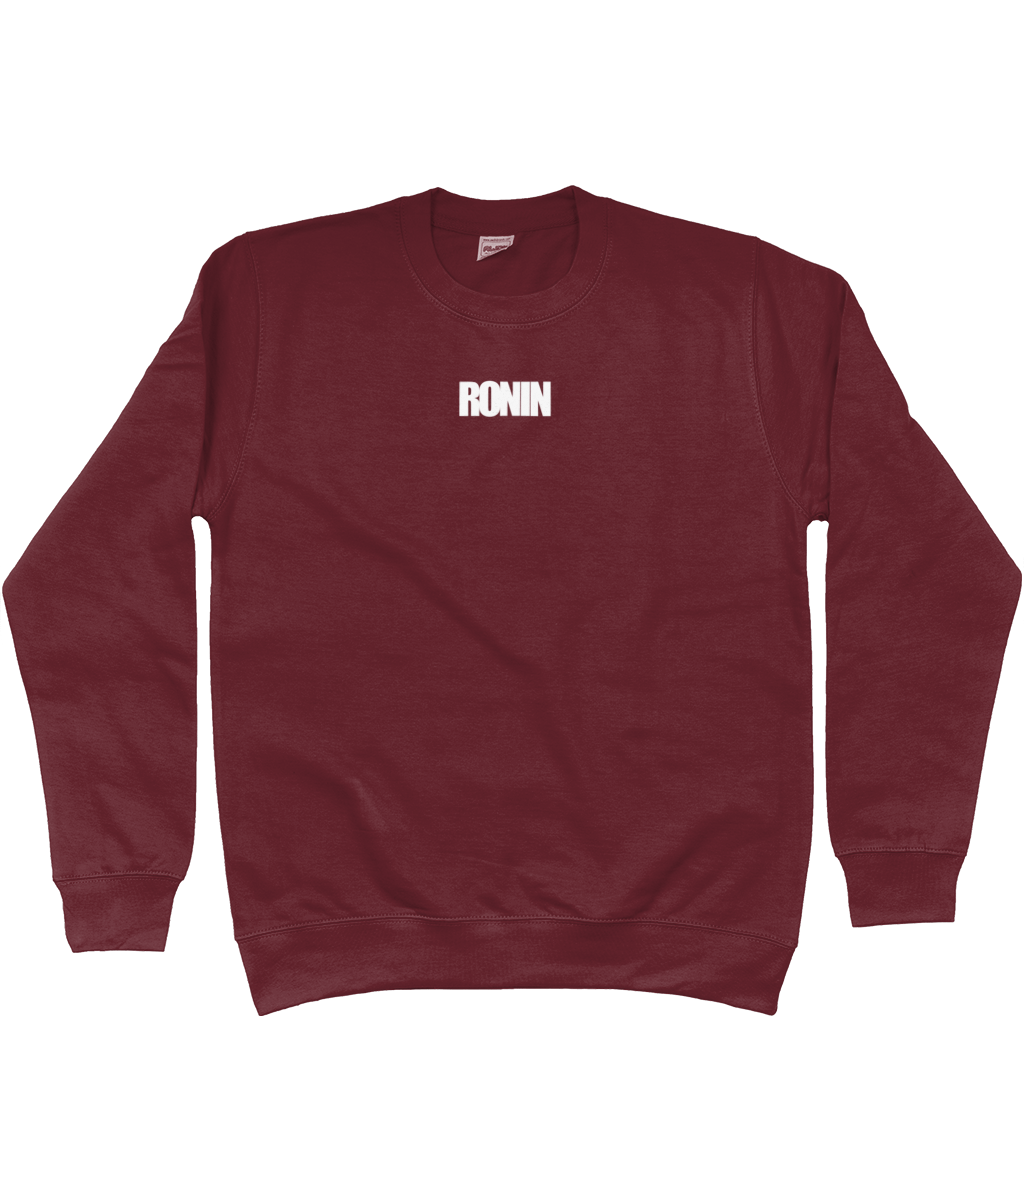 Punch Out Ronin jumper